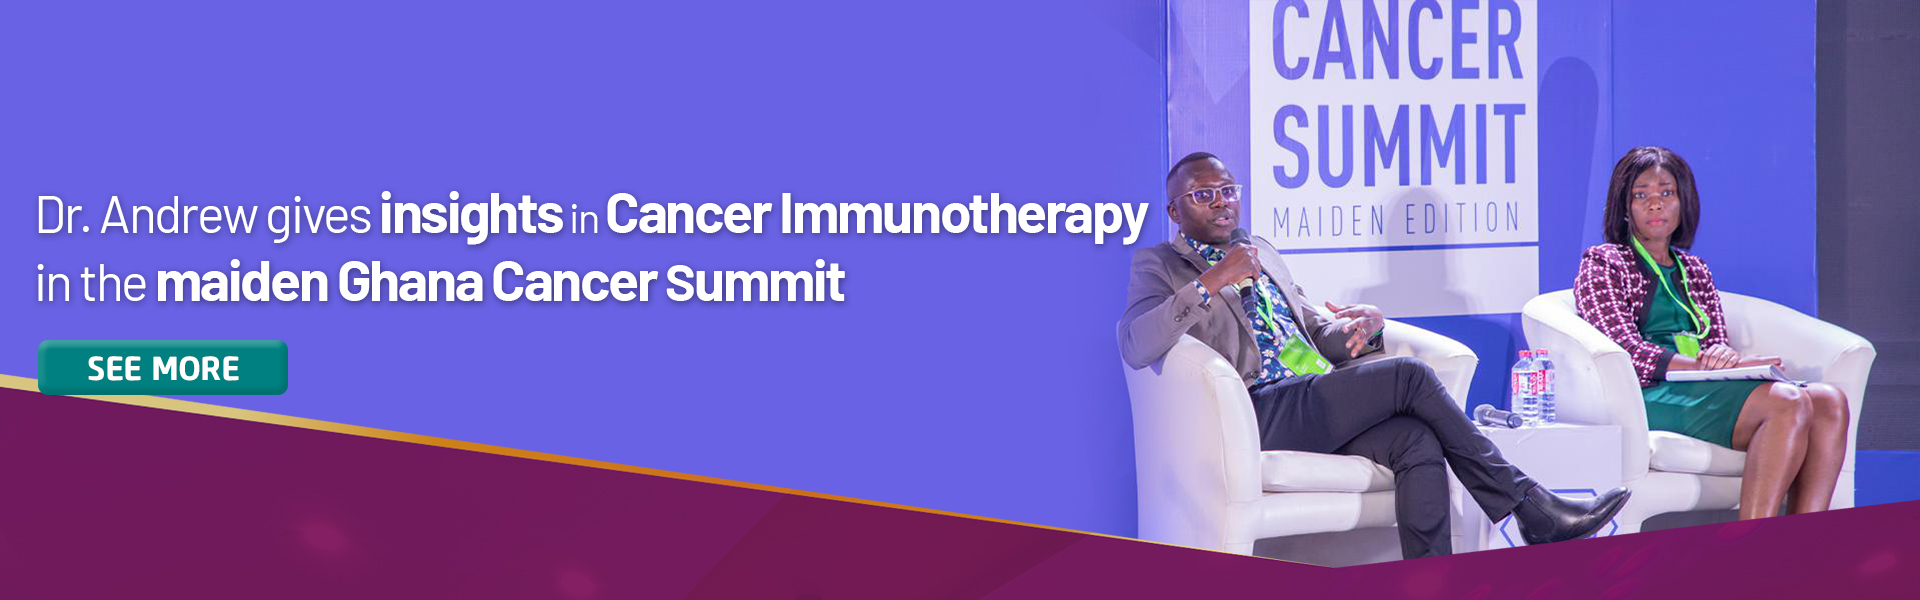 Dr.-Andrew-gives-insights-in-cancer-immunotherapy-in-the-maiden-Ghana-Cancer-summit